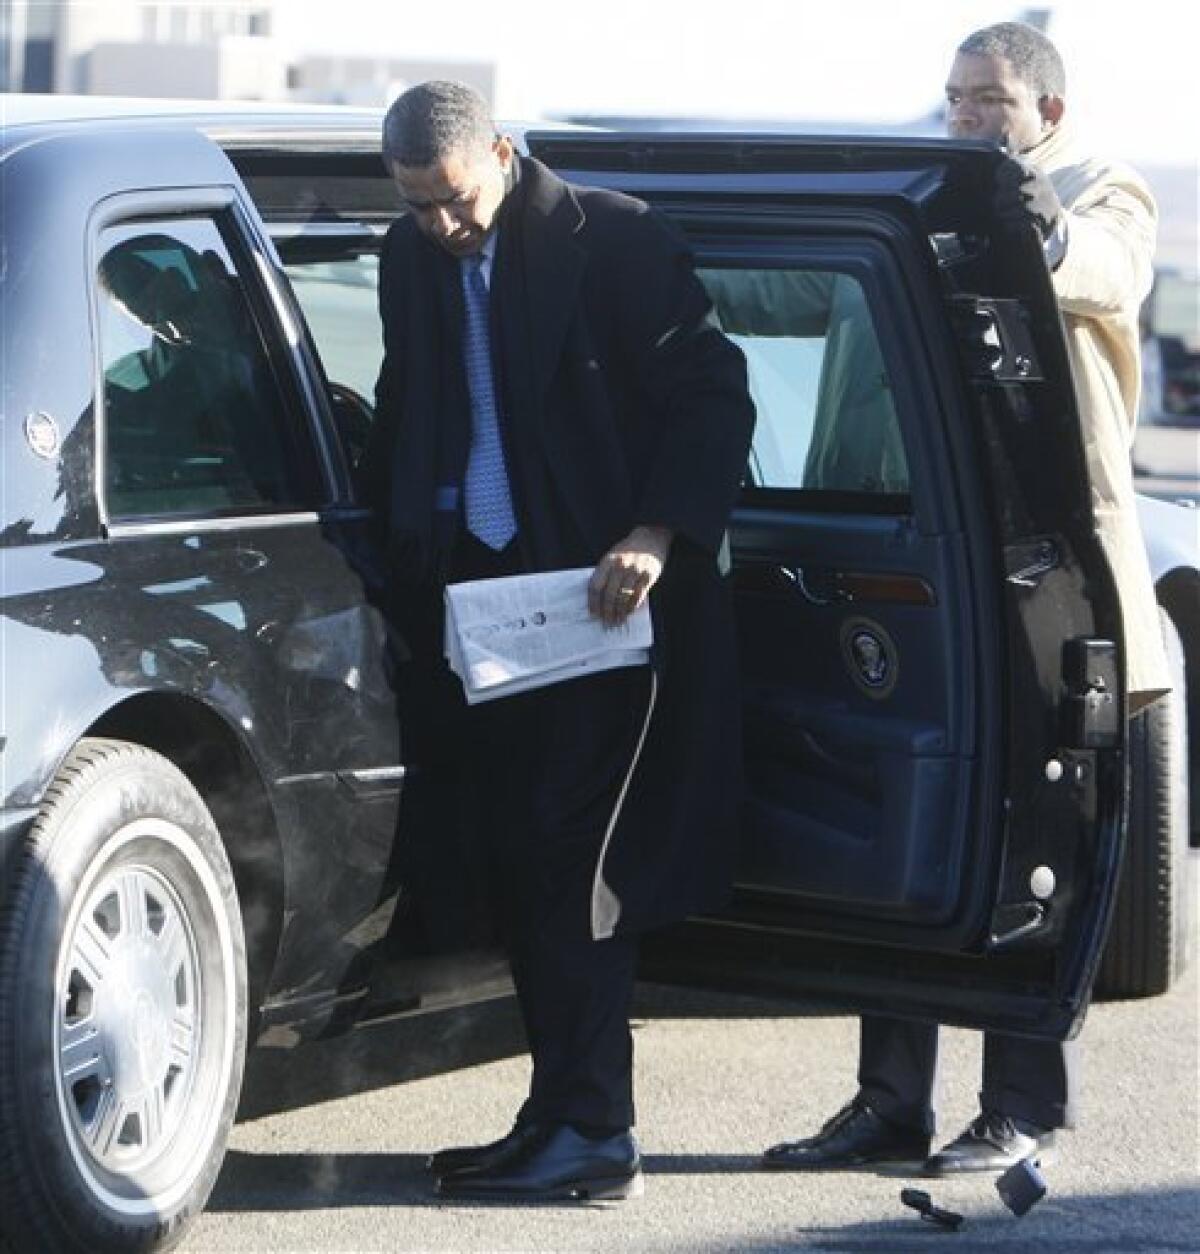 President-elect Barack Obama drops his BlackBerry as he steps out of his limousine before boarding a plane at Washington's Reagan National Airport, Friday, Jan. 16, 2009, prior to heading to Bedford, Ohio, where he will meet with workers at Cardinal Fasteners. (AP Photo/Charles Dharapak)